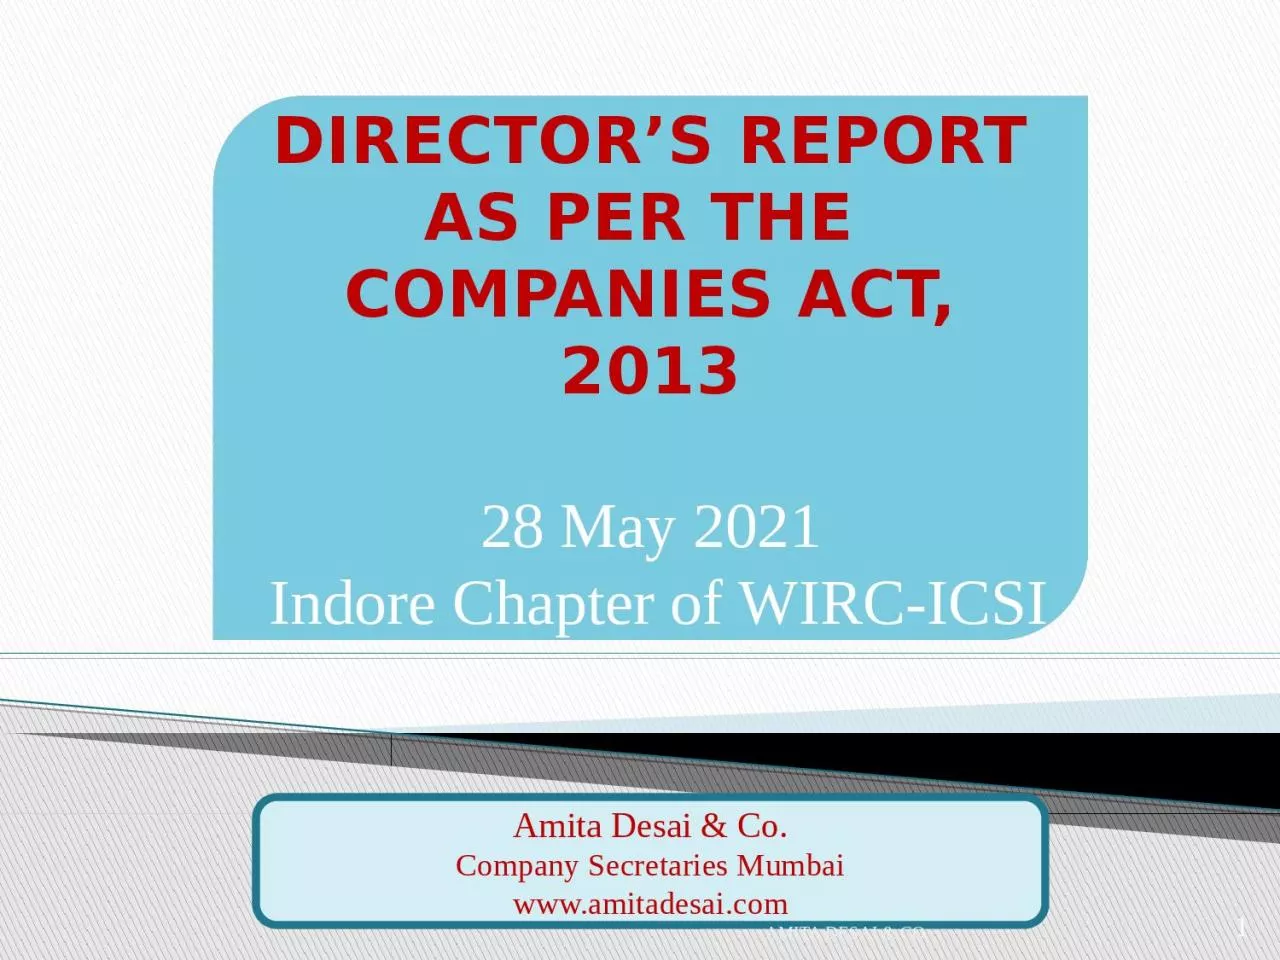 1 DIRECTOR’S REPORT AS PER THE